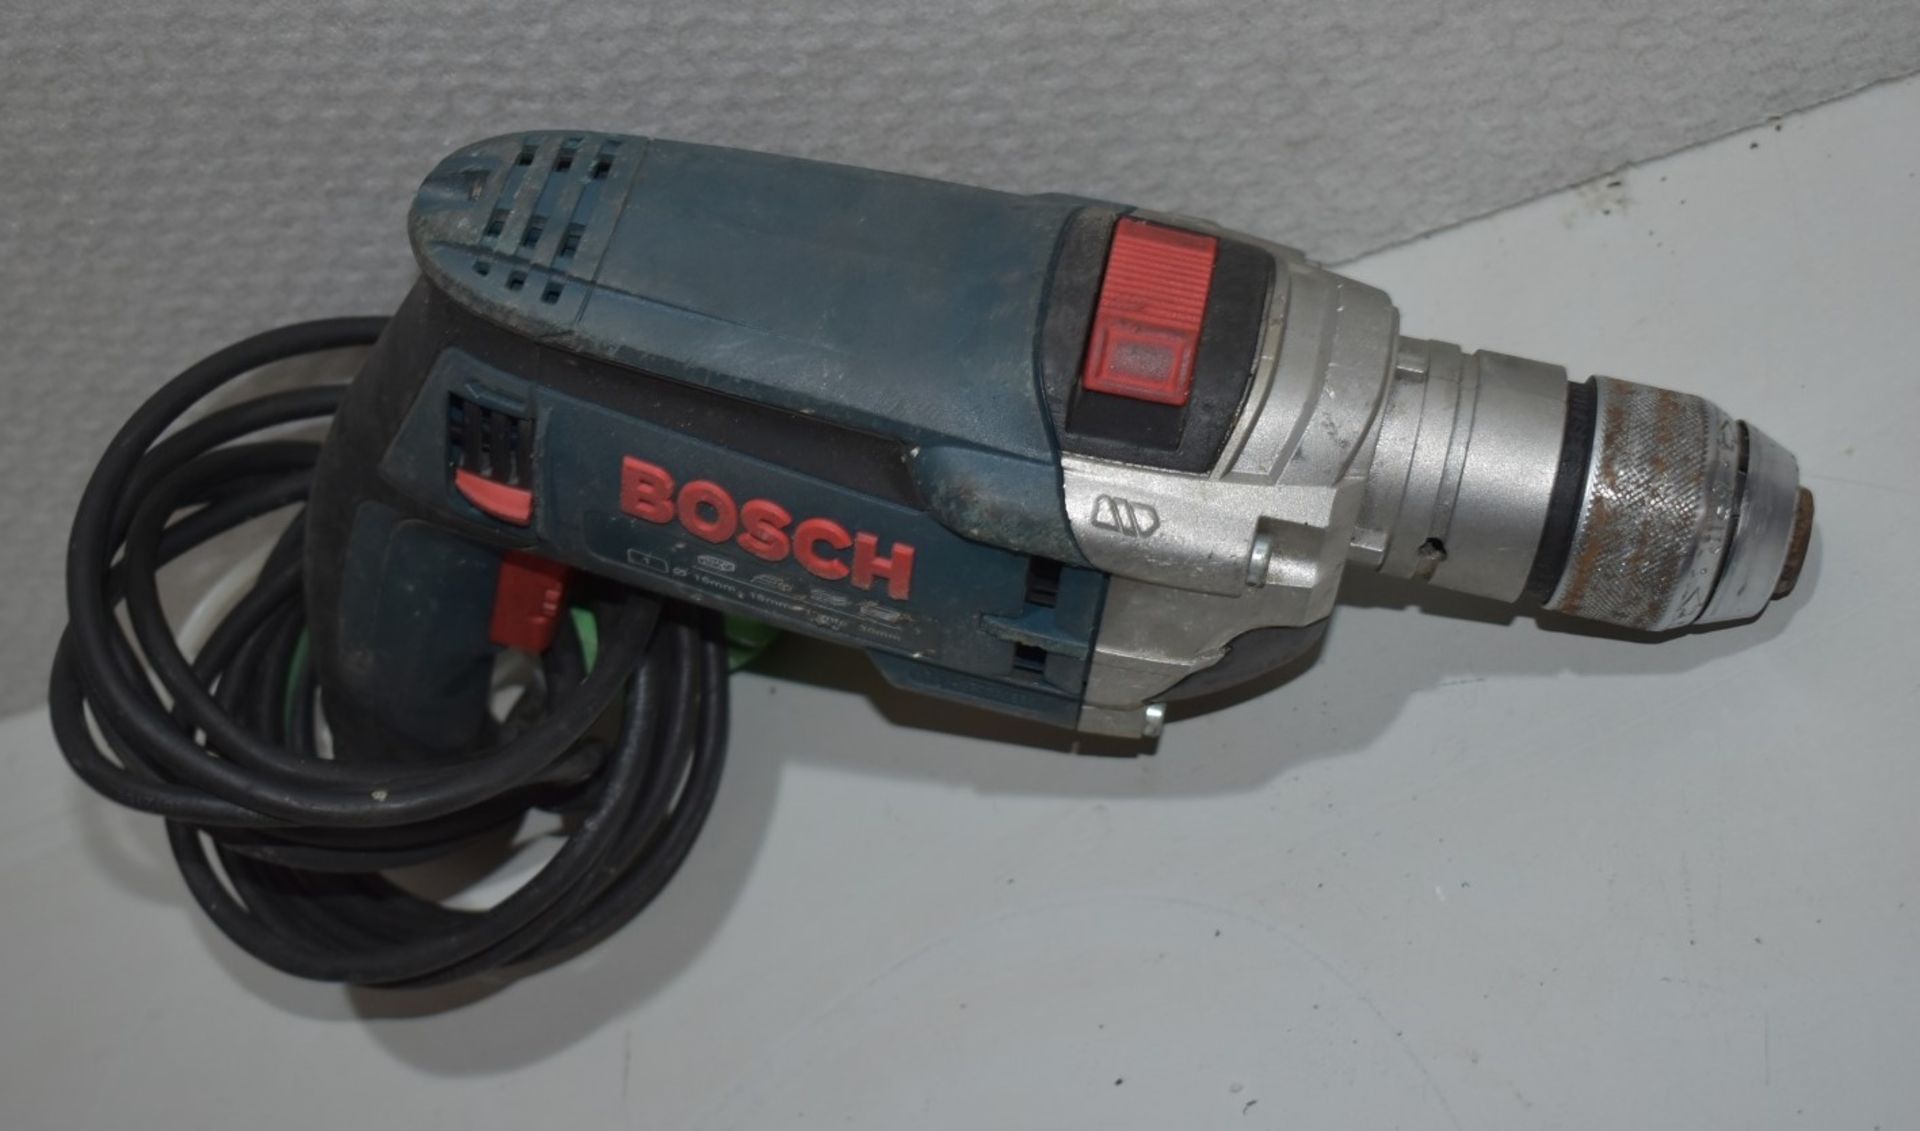 1 x BOSCH GSB 16 RE Professional Impact Drill - Original RRP £182.00 - Ref: DS7529 ALT - CL816 - - Image 2 of 3